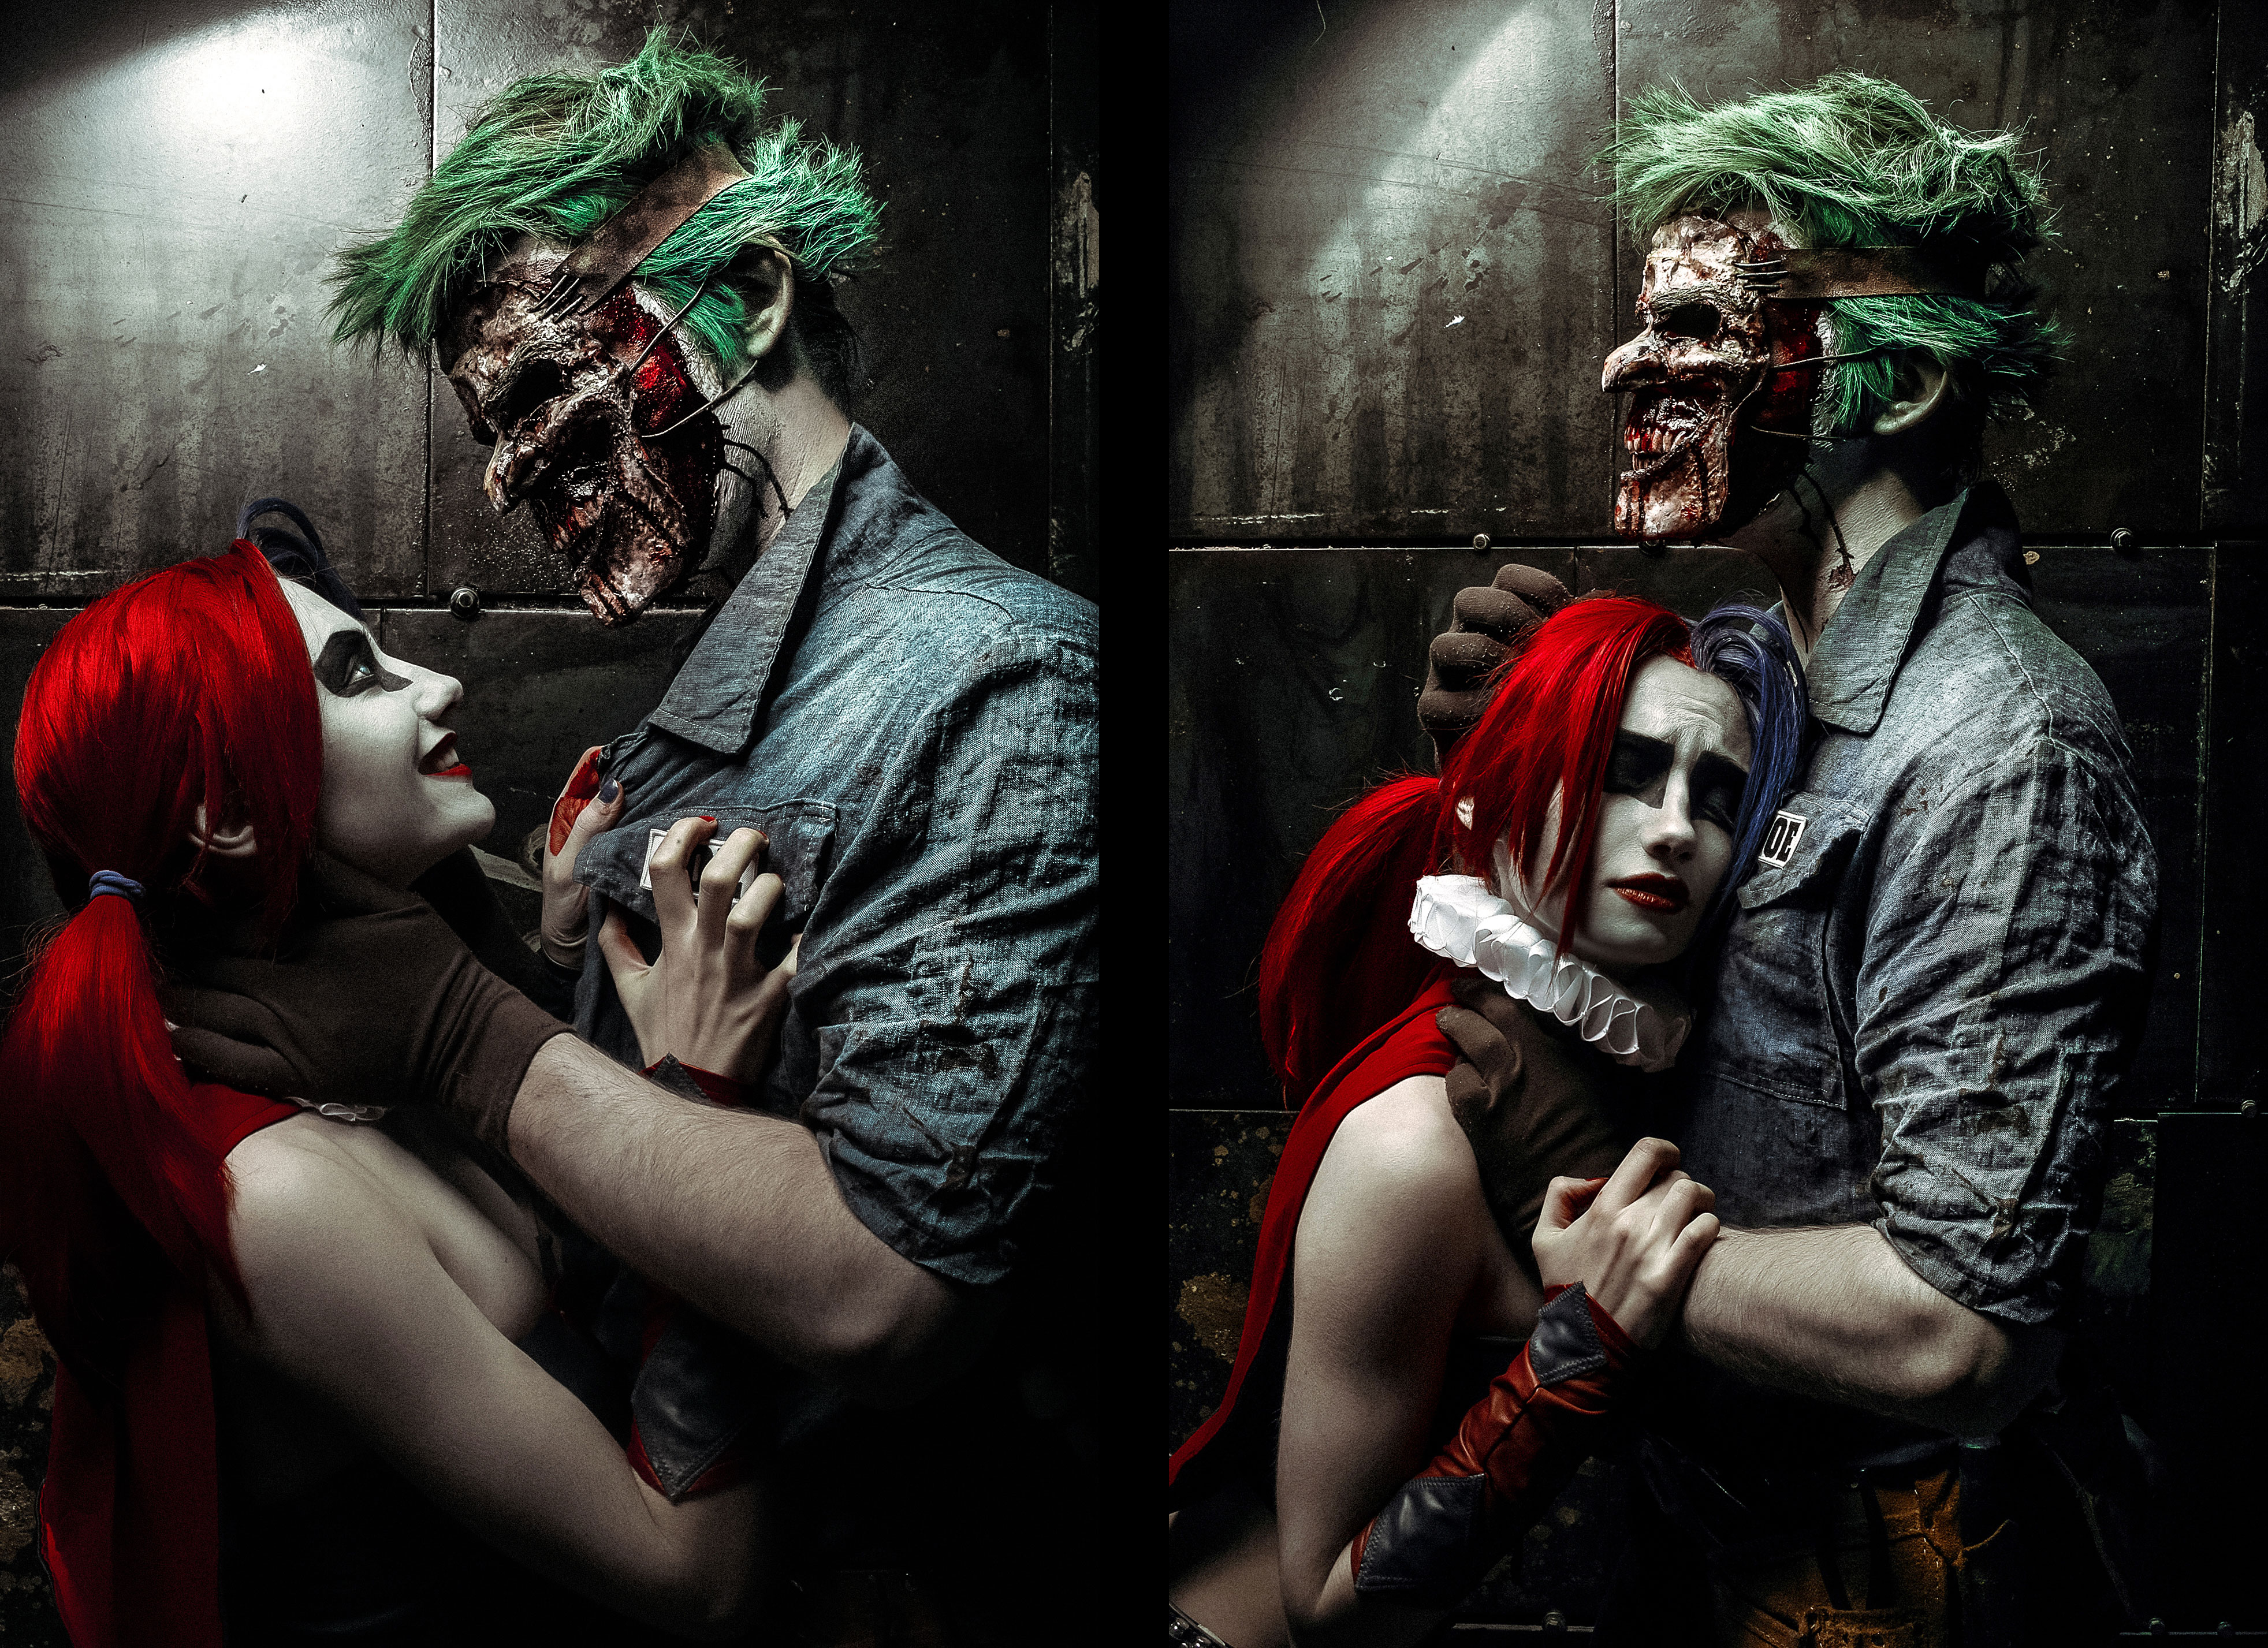 cosplay] Harley Quinn and Joker by Carry Key and Lucher | Scrolller